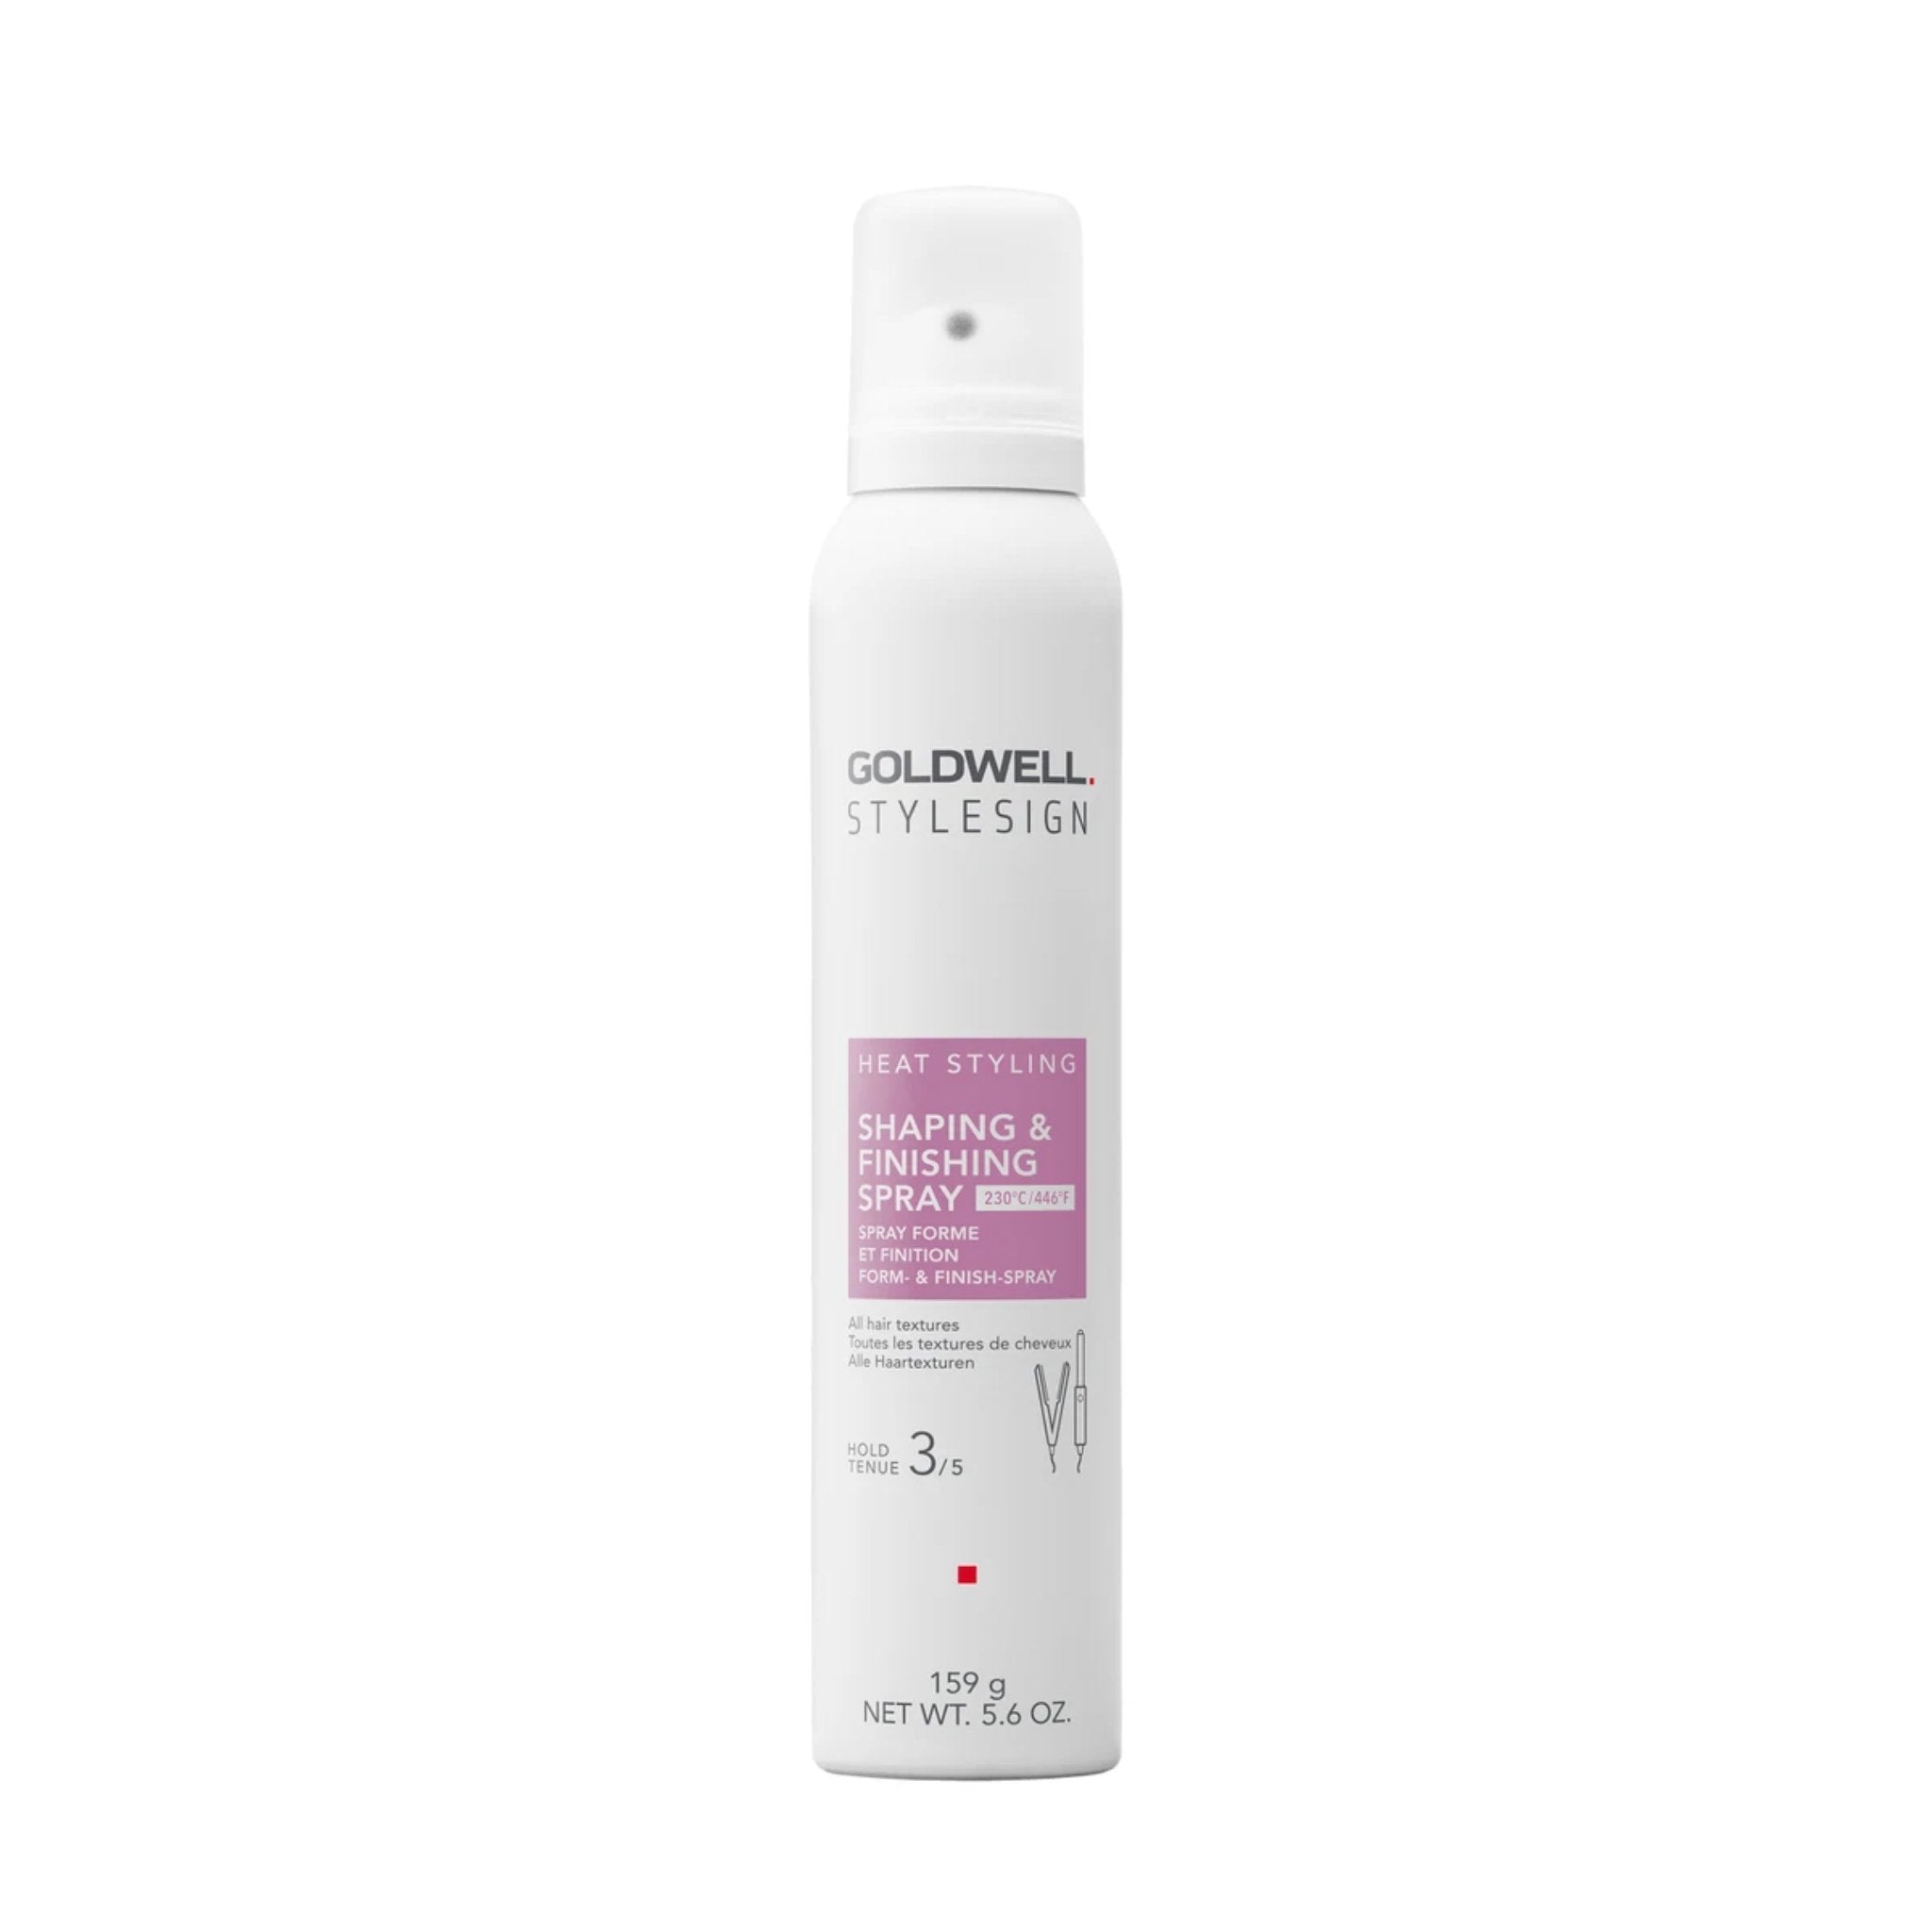 Goldwell. Spray Forme Et Finition Stylesign - 200 ml - Concept C. Shop